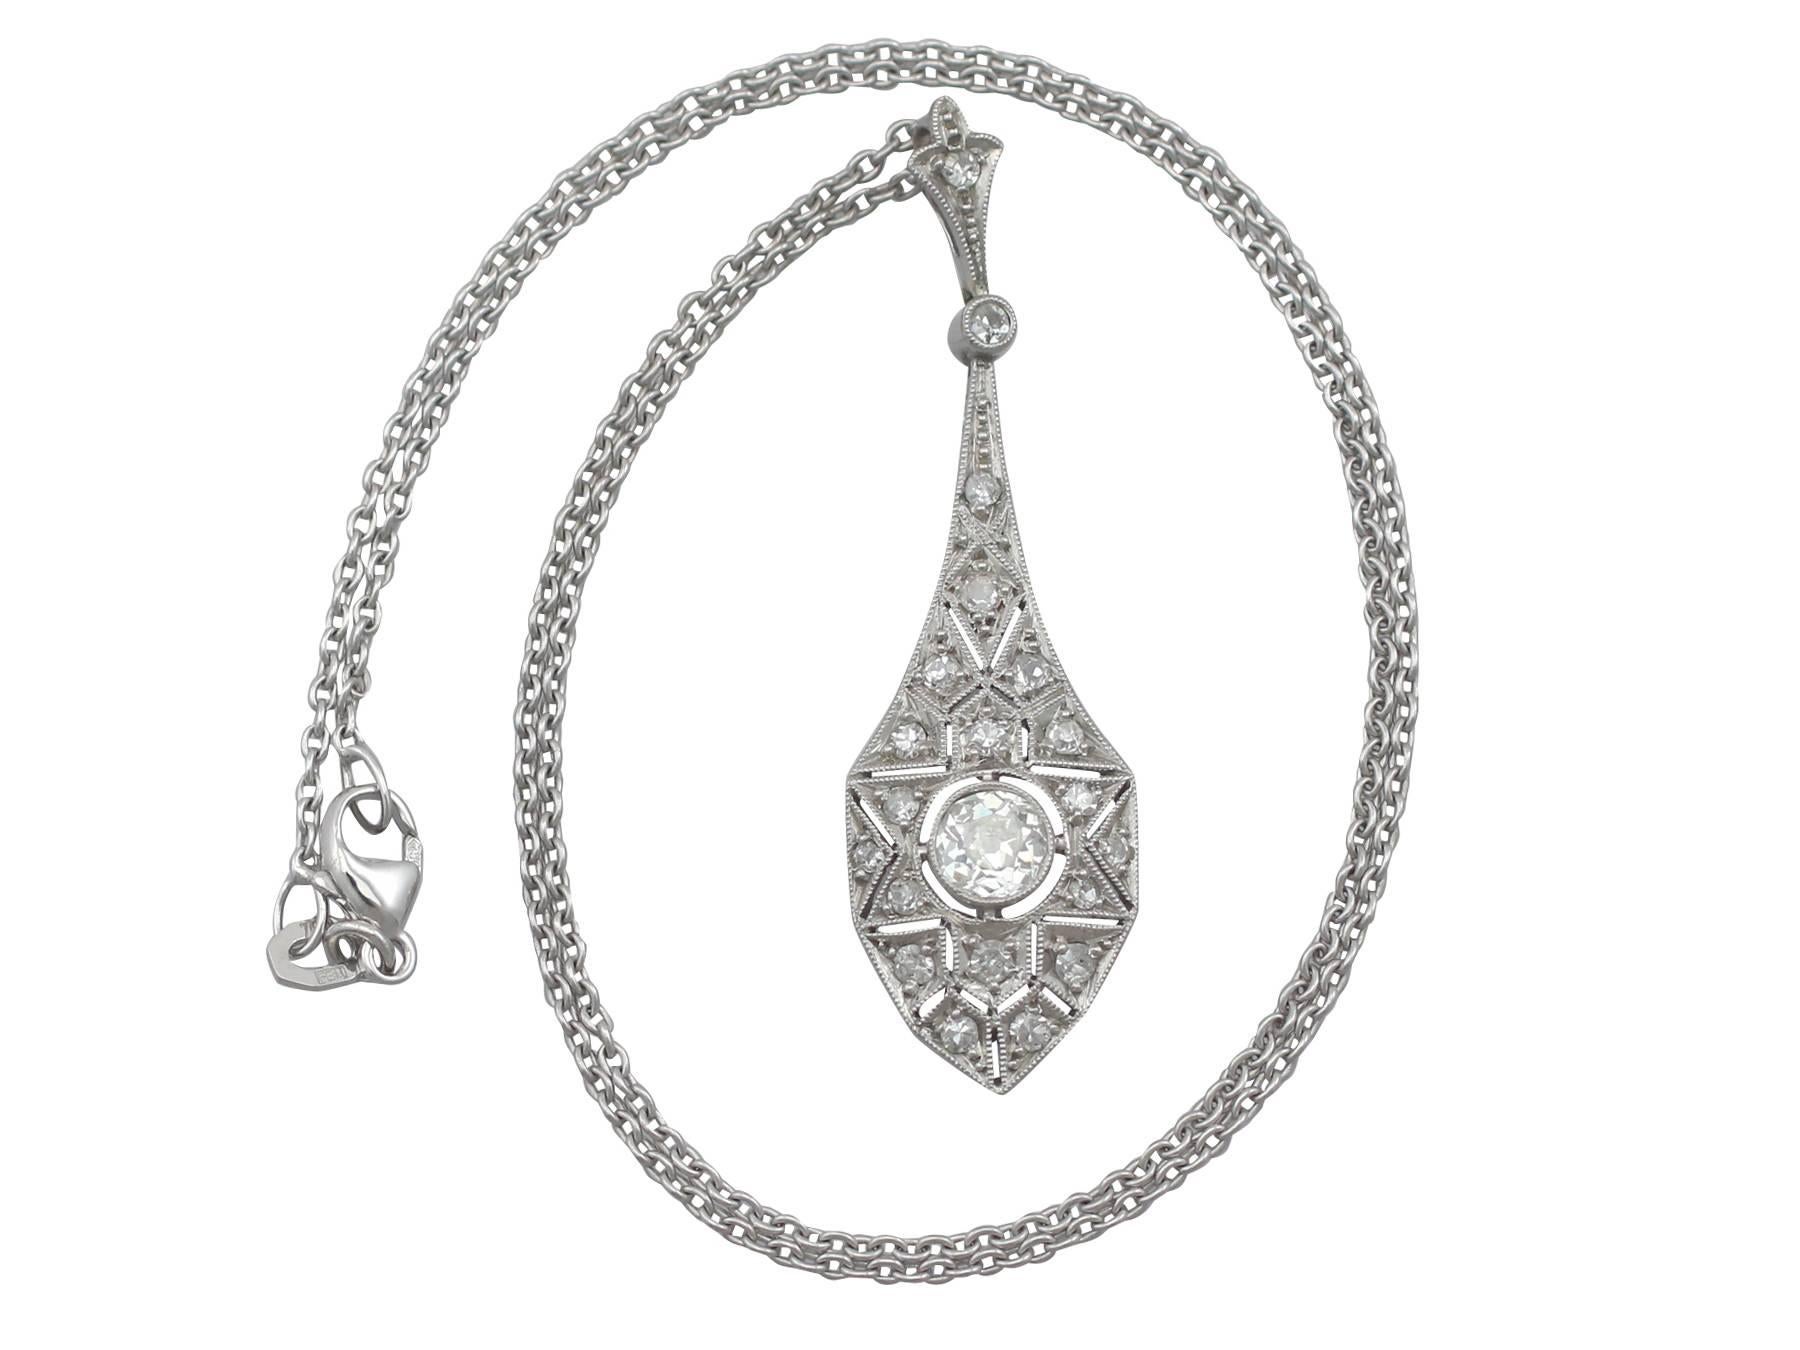 A stunning antique 1920s Art Deco 0.94 carat diamond and 18 karat white gold pendant; part of our diverse diamond jewellery and estate jewelry collections.

This stunning, fine and impressive antique Art Deco necklace has been crafted in 18k white